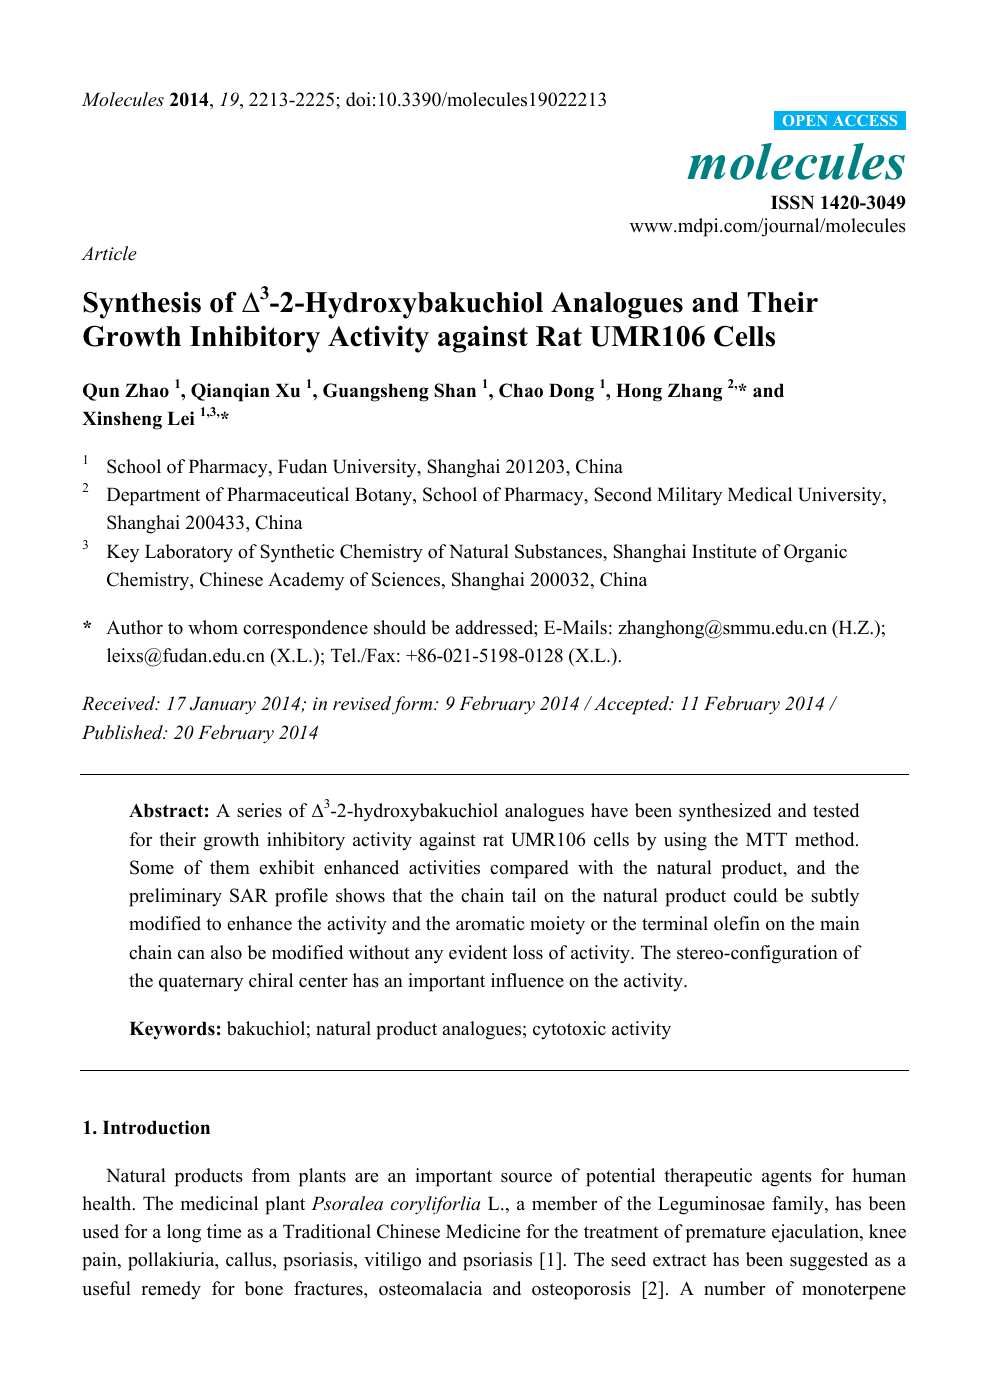 Synthesis Of 3 2 Hydroxybakuchiol Analogues And Their Growth Inhibitory Activity Against Rat Umr106 Cells Topic Of Research Paper In Chemical Sciences Download Scholarly Article Pdf And Read For Free On Cyberleninka Open